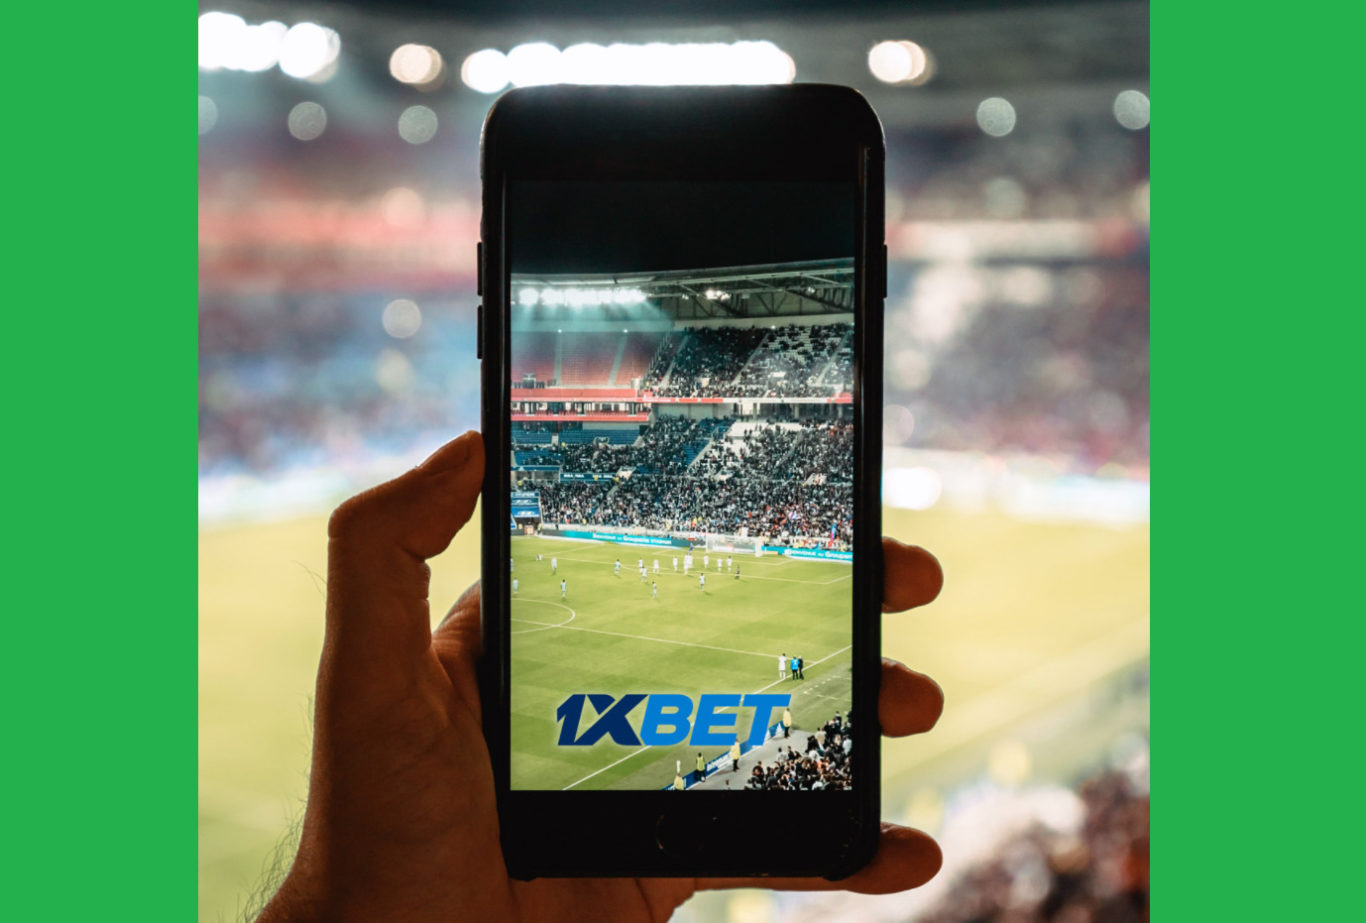 Download 1xBet Mobile App